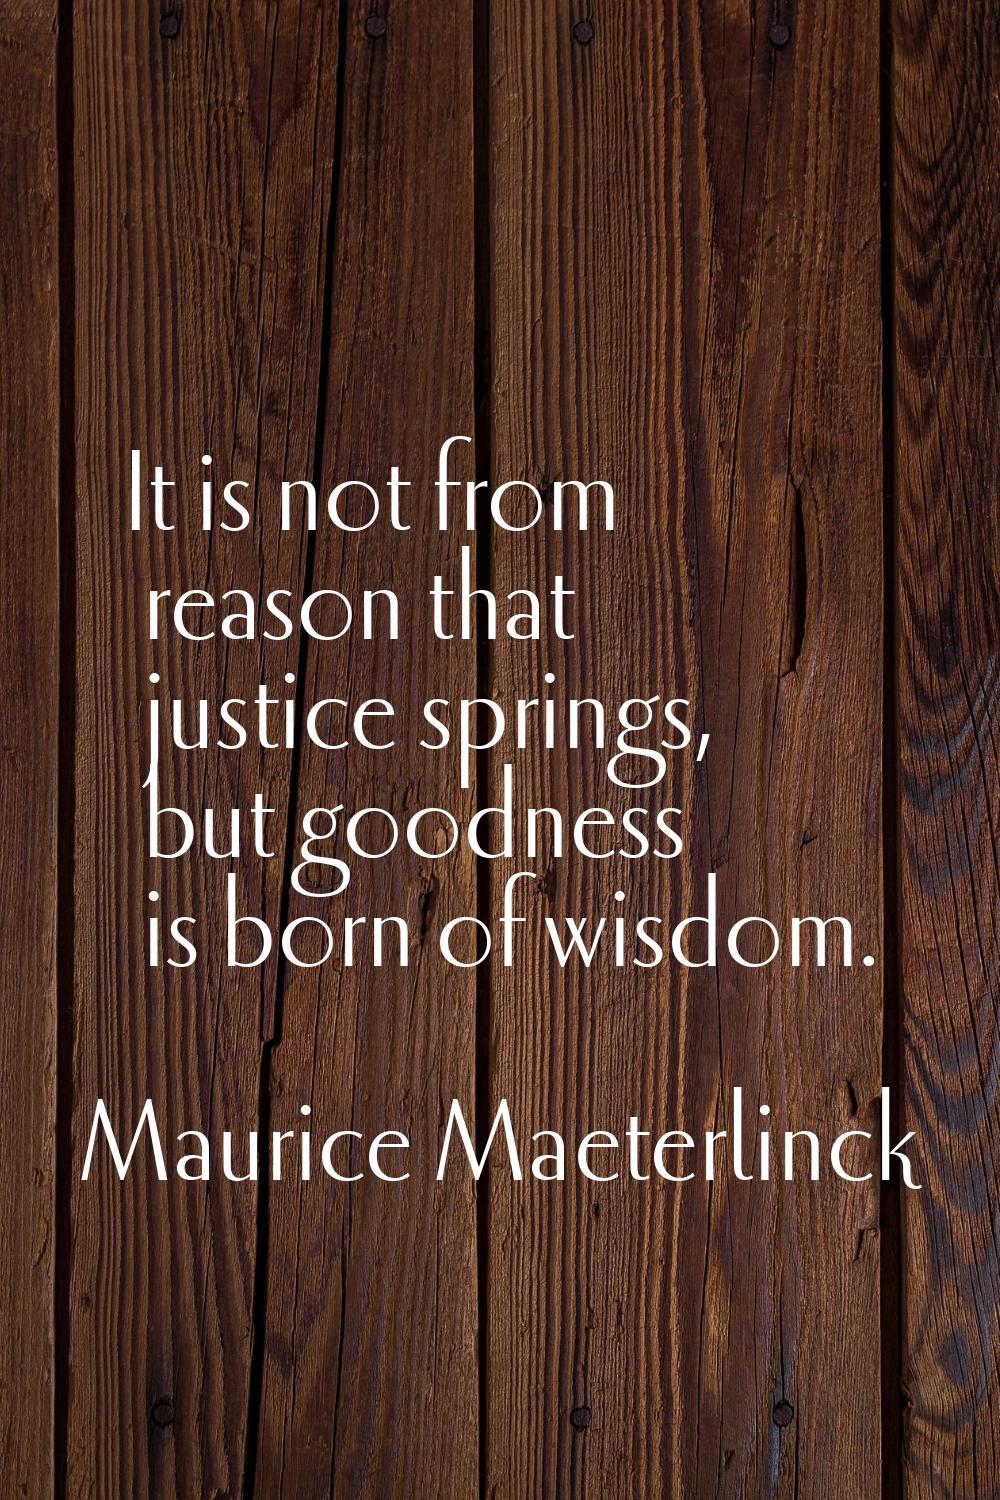 It is not from reason that justice springs, but goodness is born of wisdom.